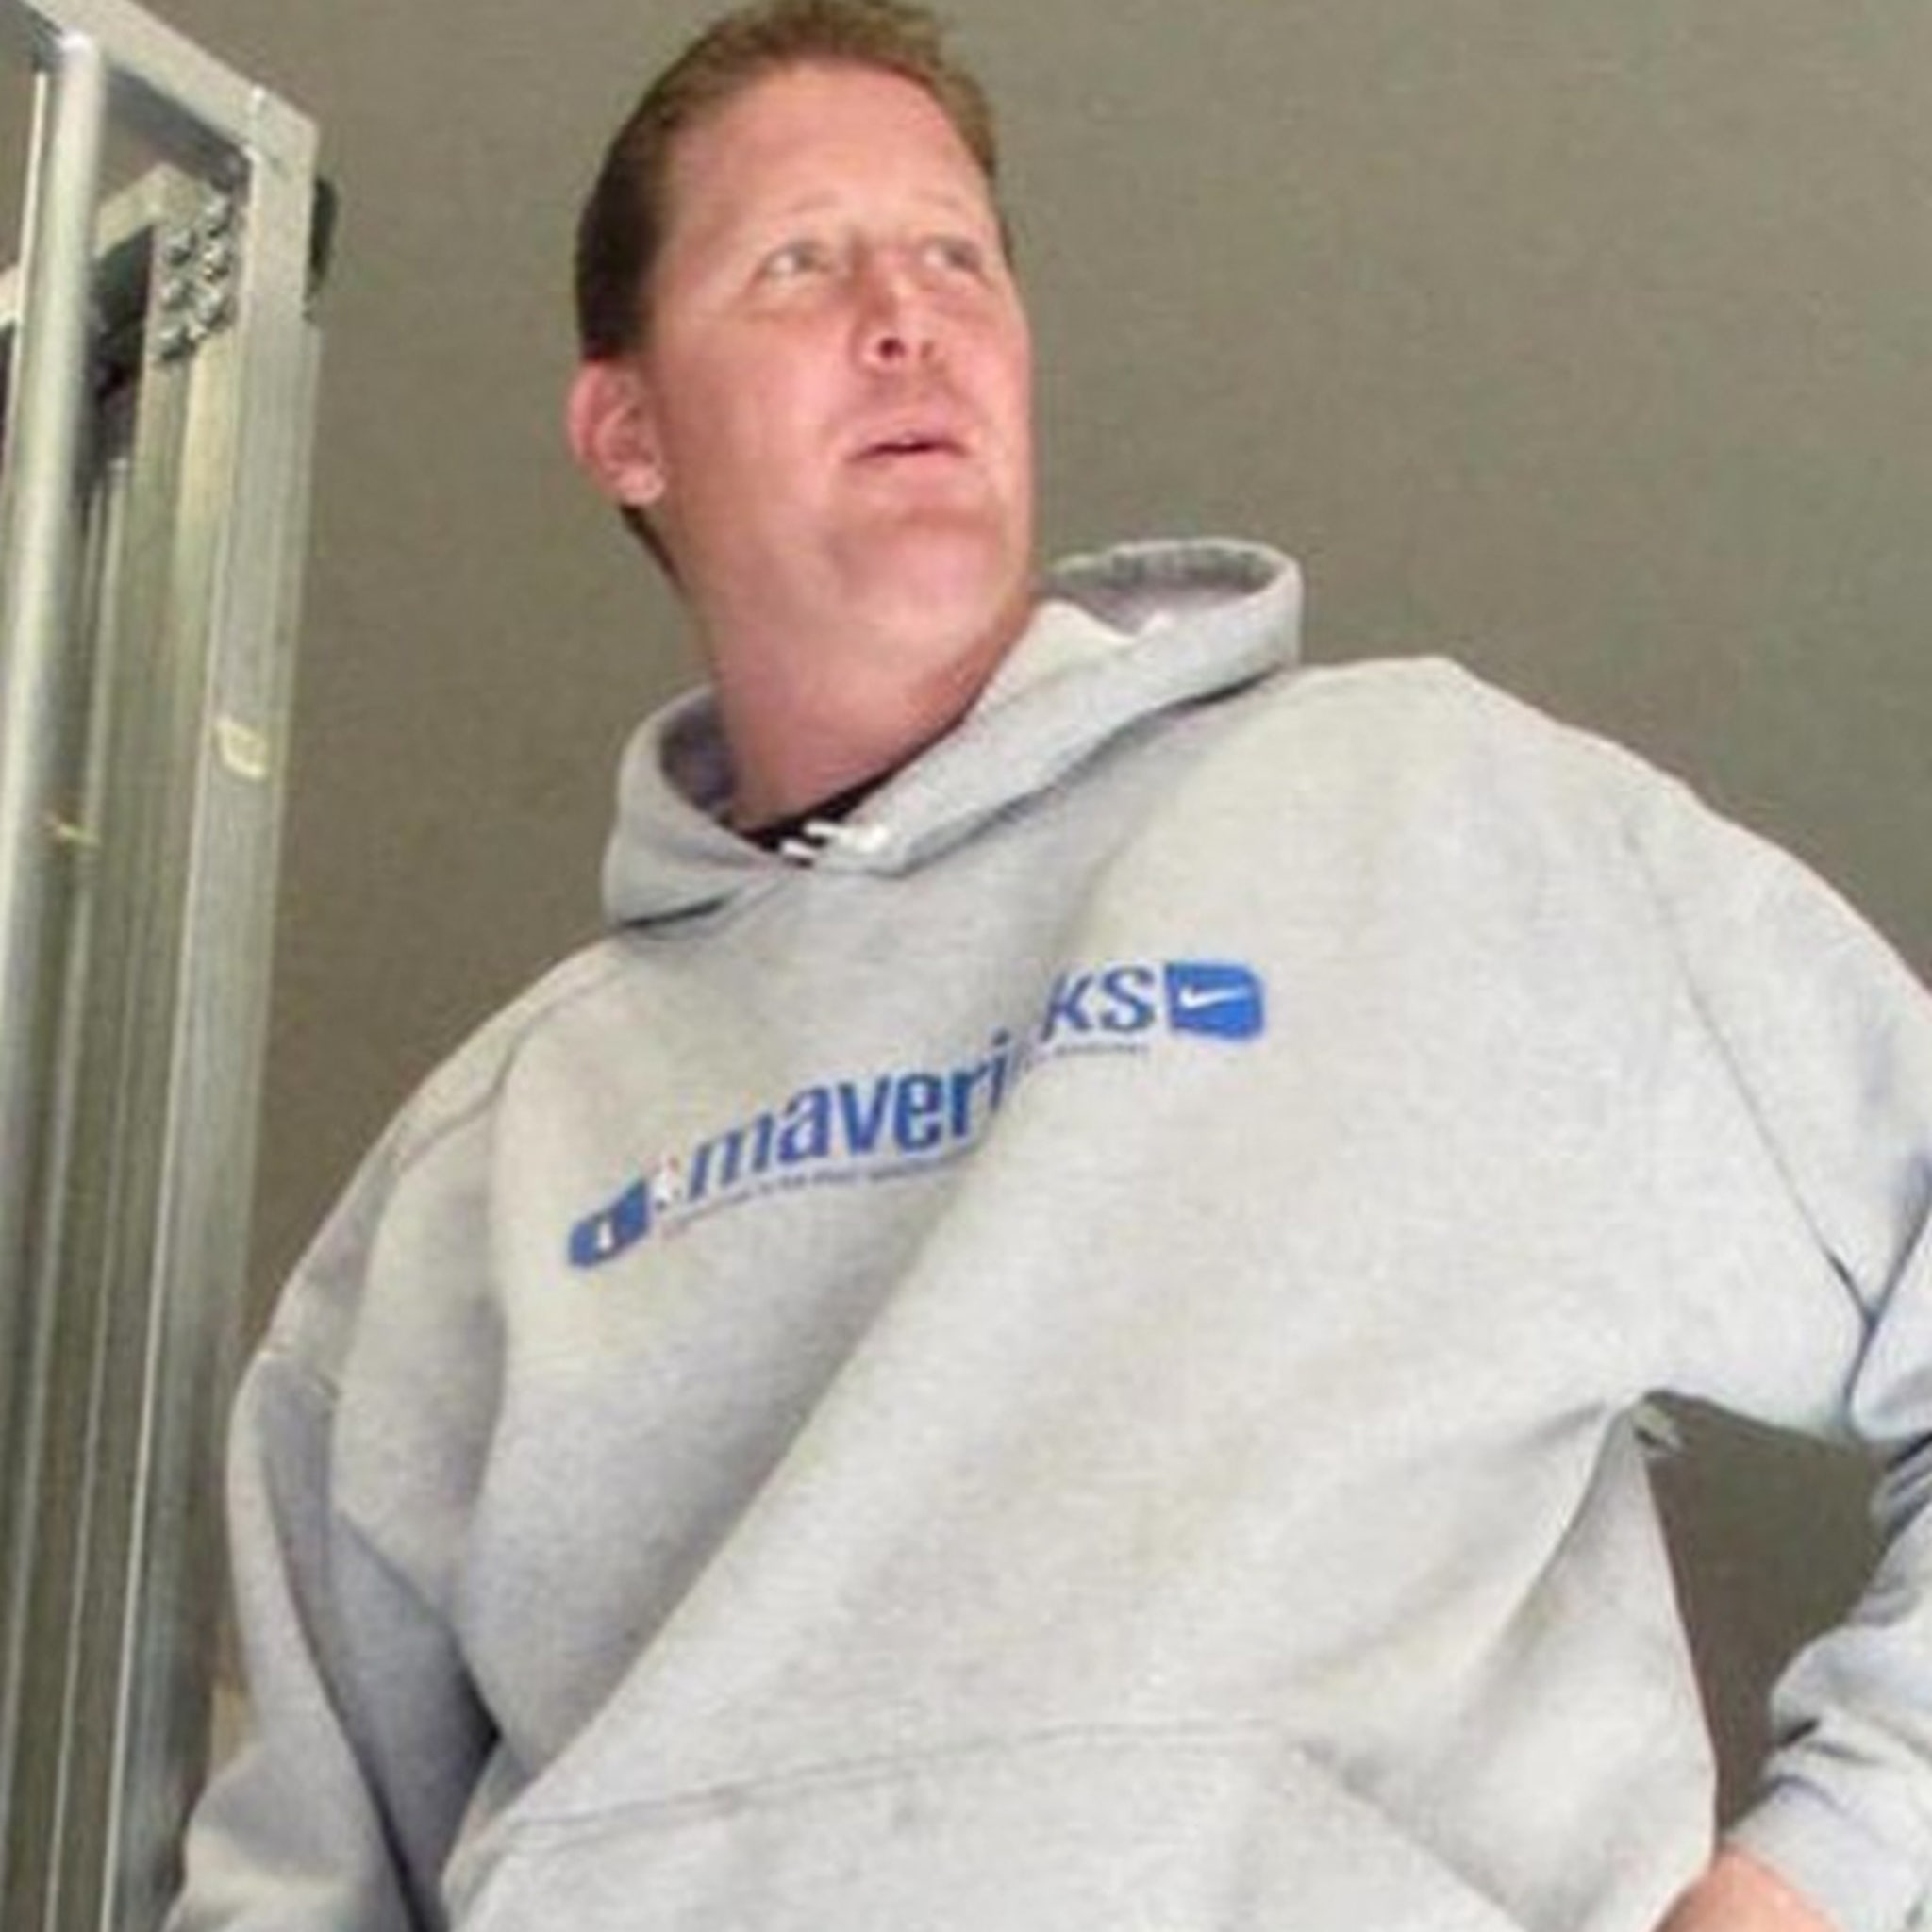 Shawn Bradley on Fearing Death During Terrifying Bike Accident